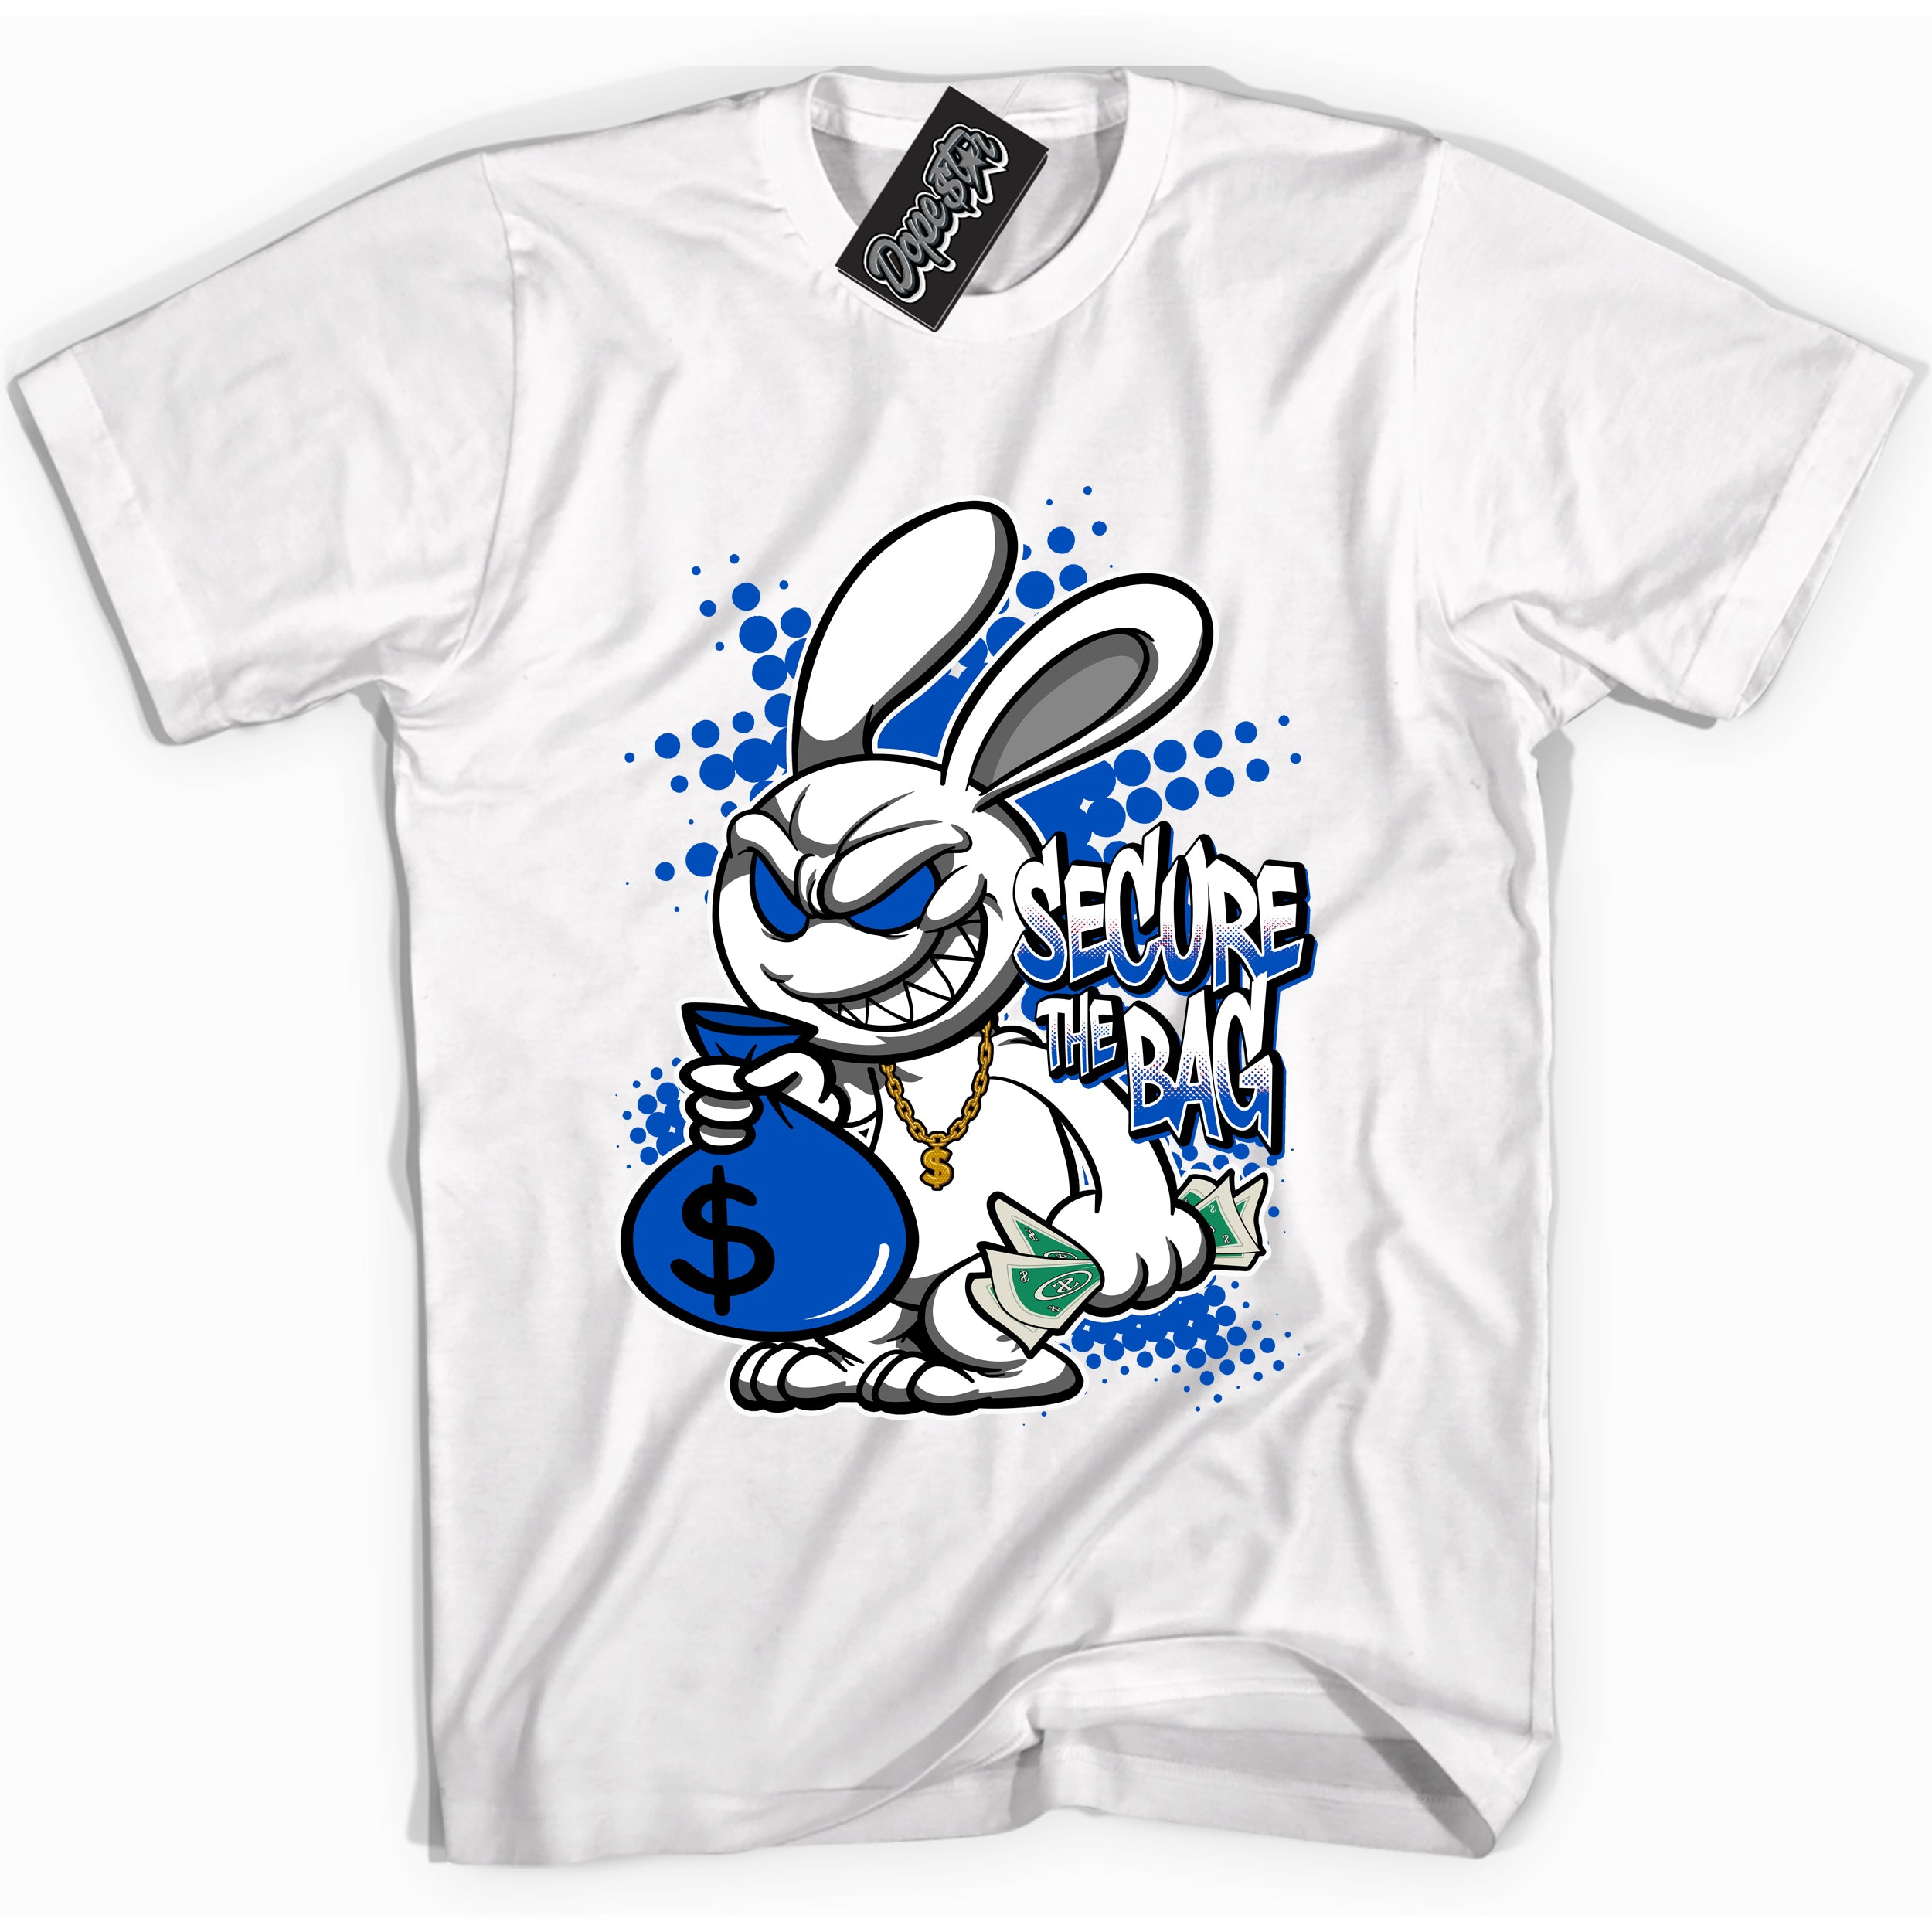 Cool White graphic tee with "Secure The Bag" design, that perfectly matches Royal Reimagined 1s sneakers 